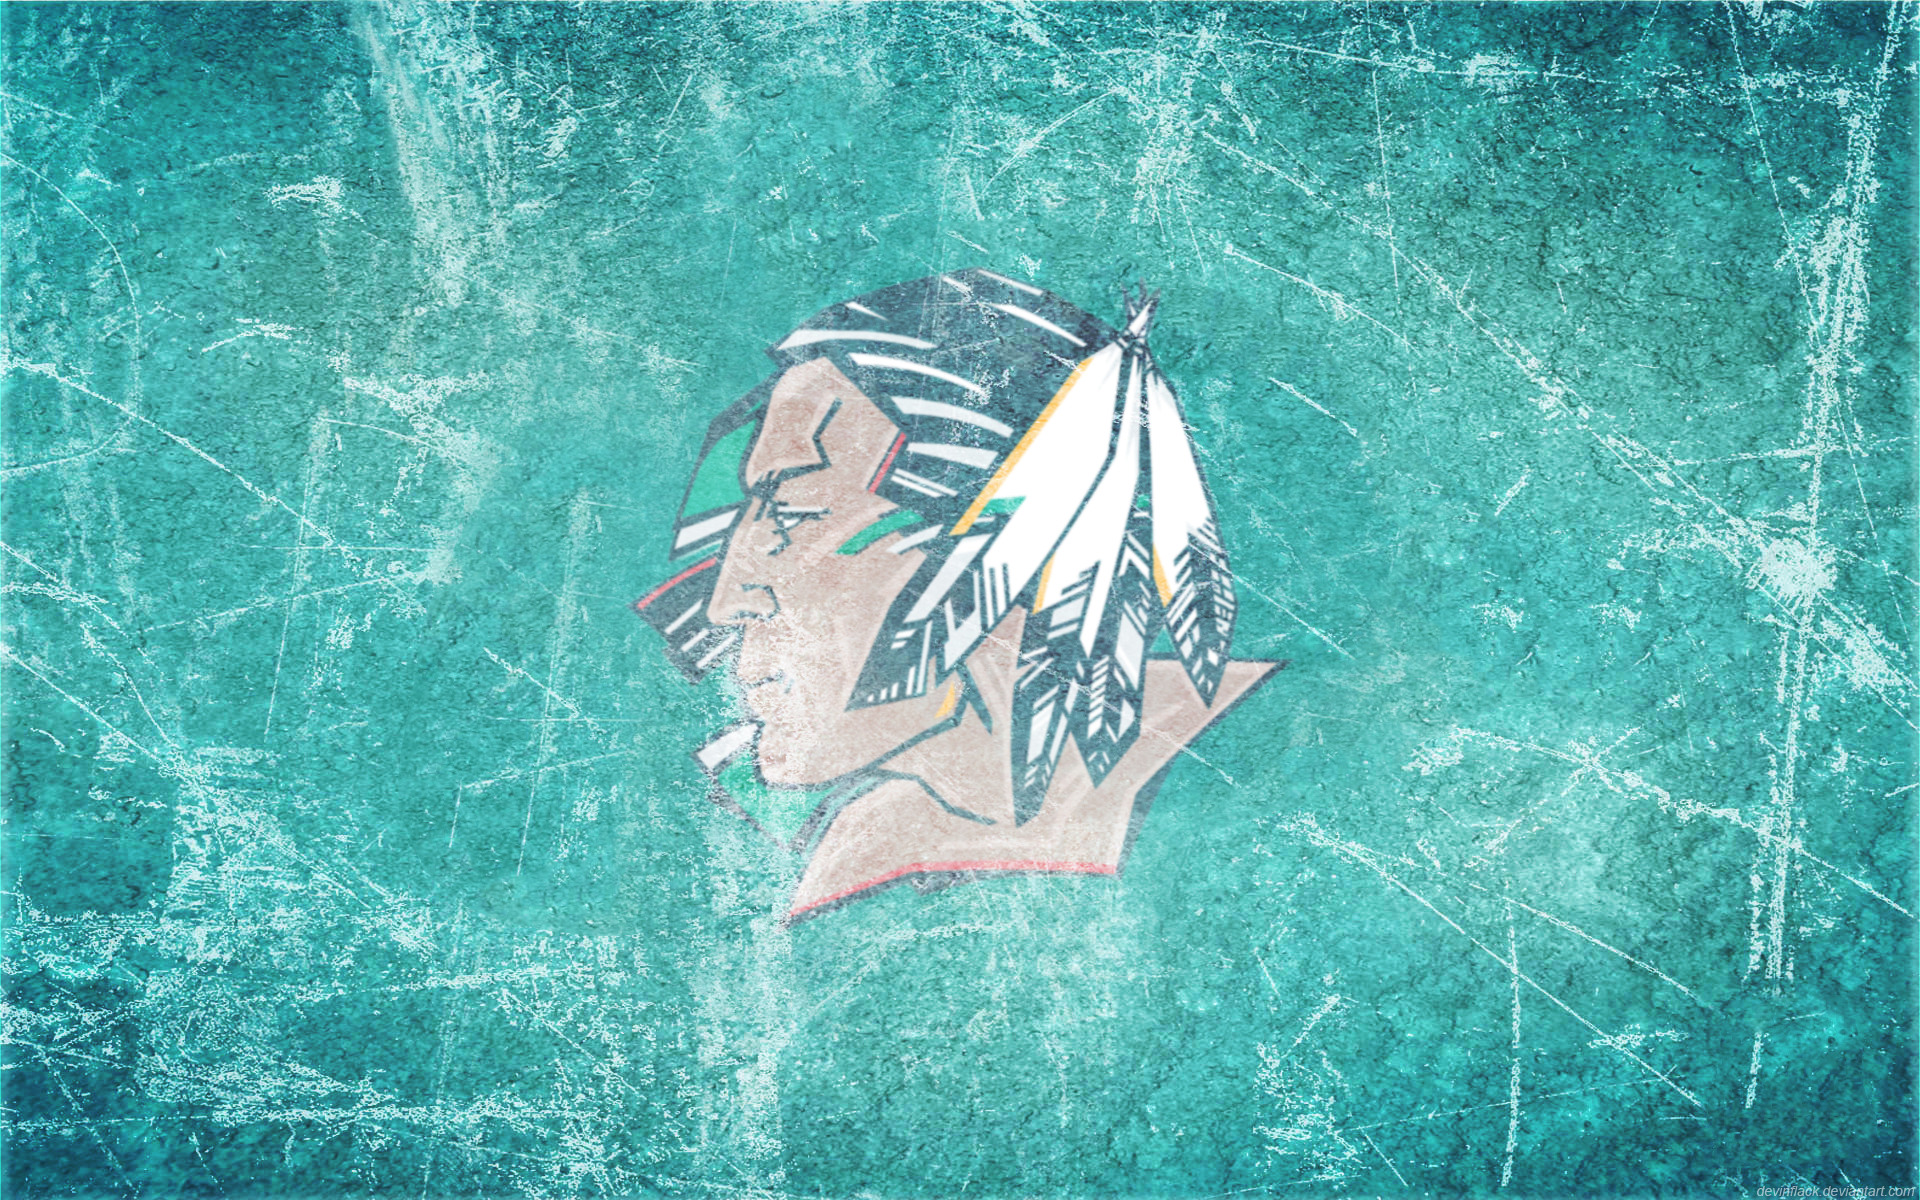 Fighting Sioux Ice Wallpaper by DevinFlack 1920x1200